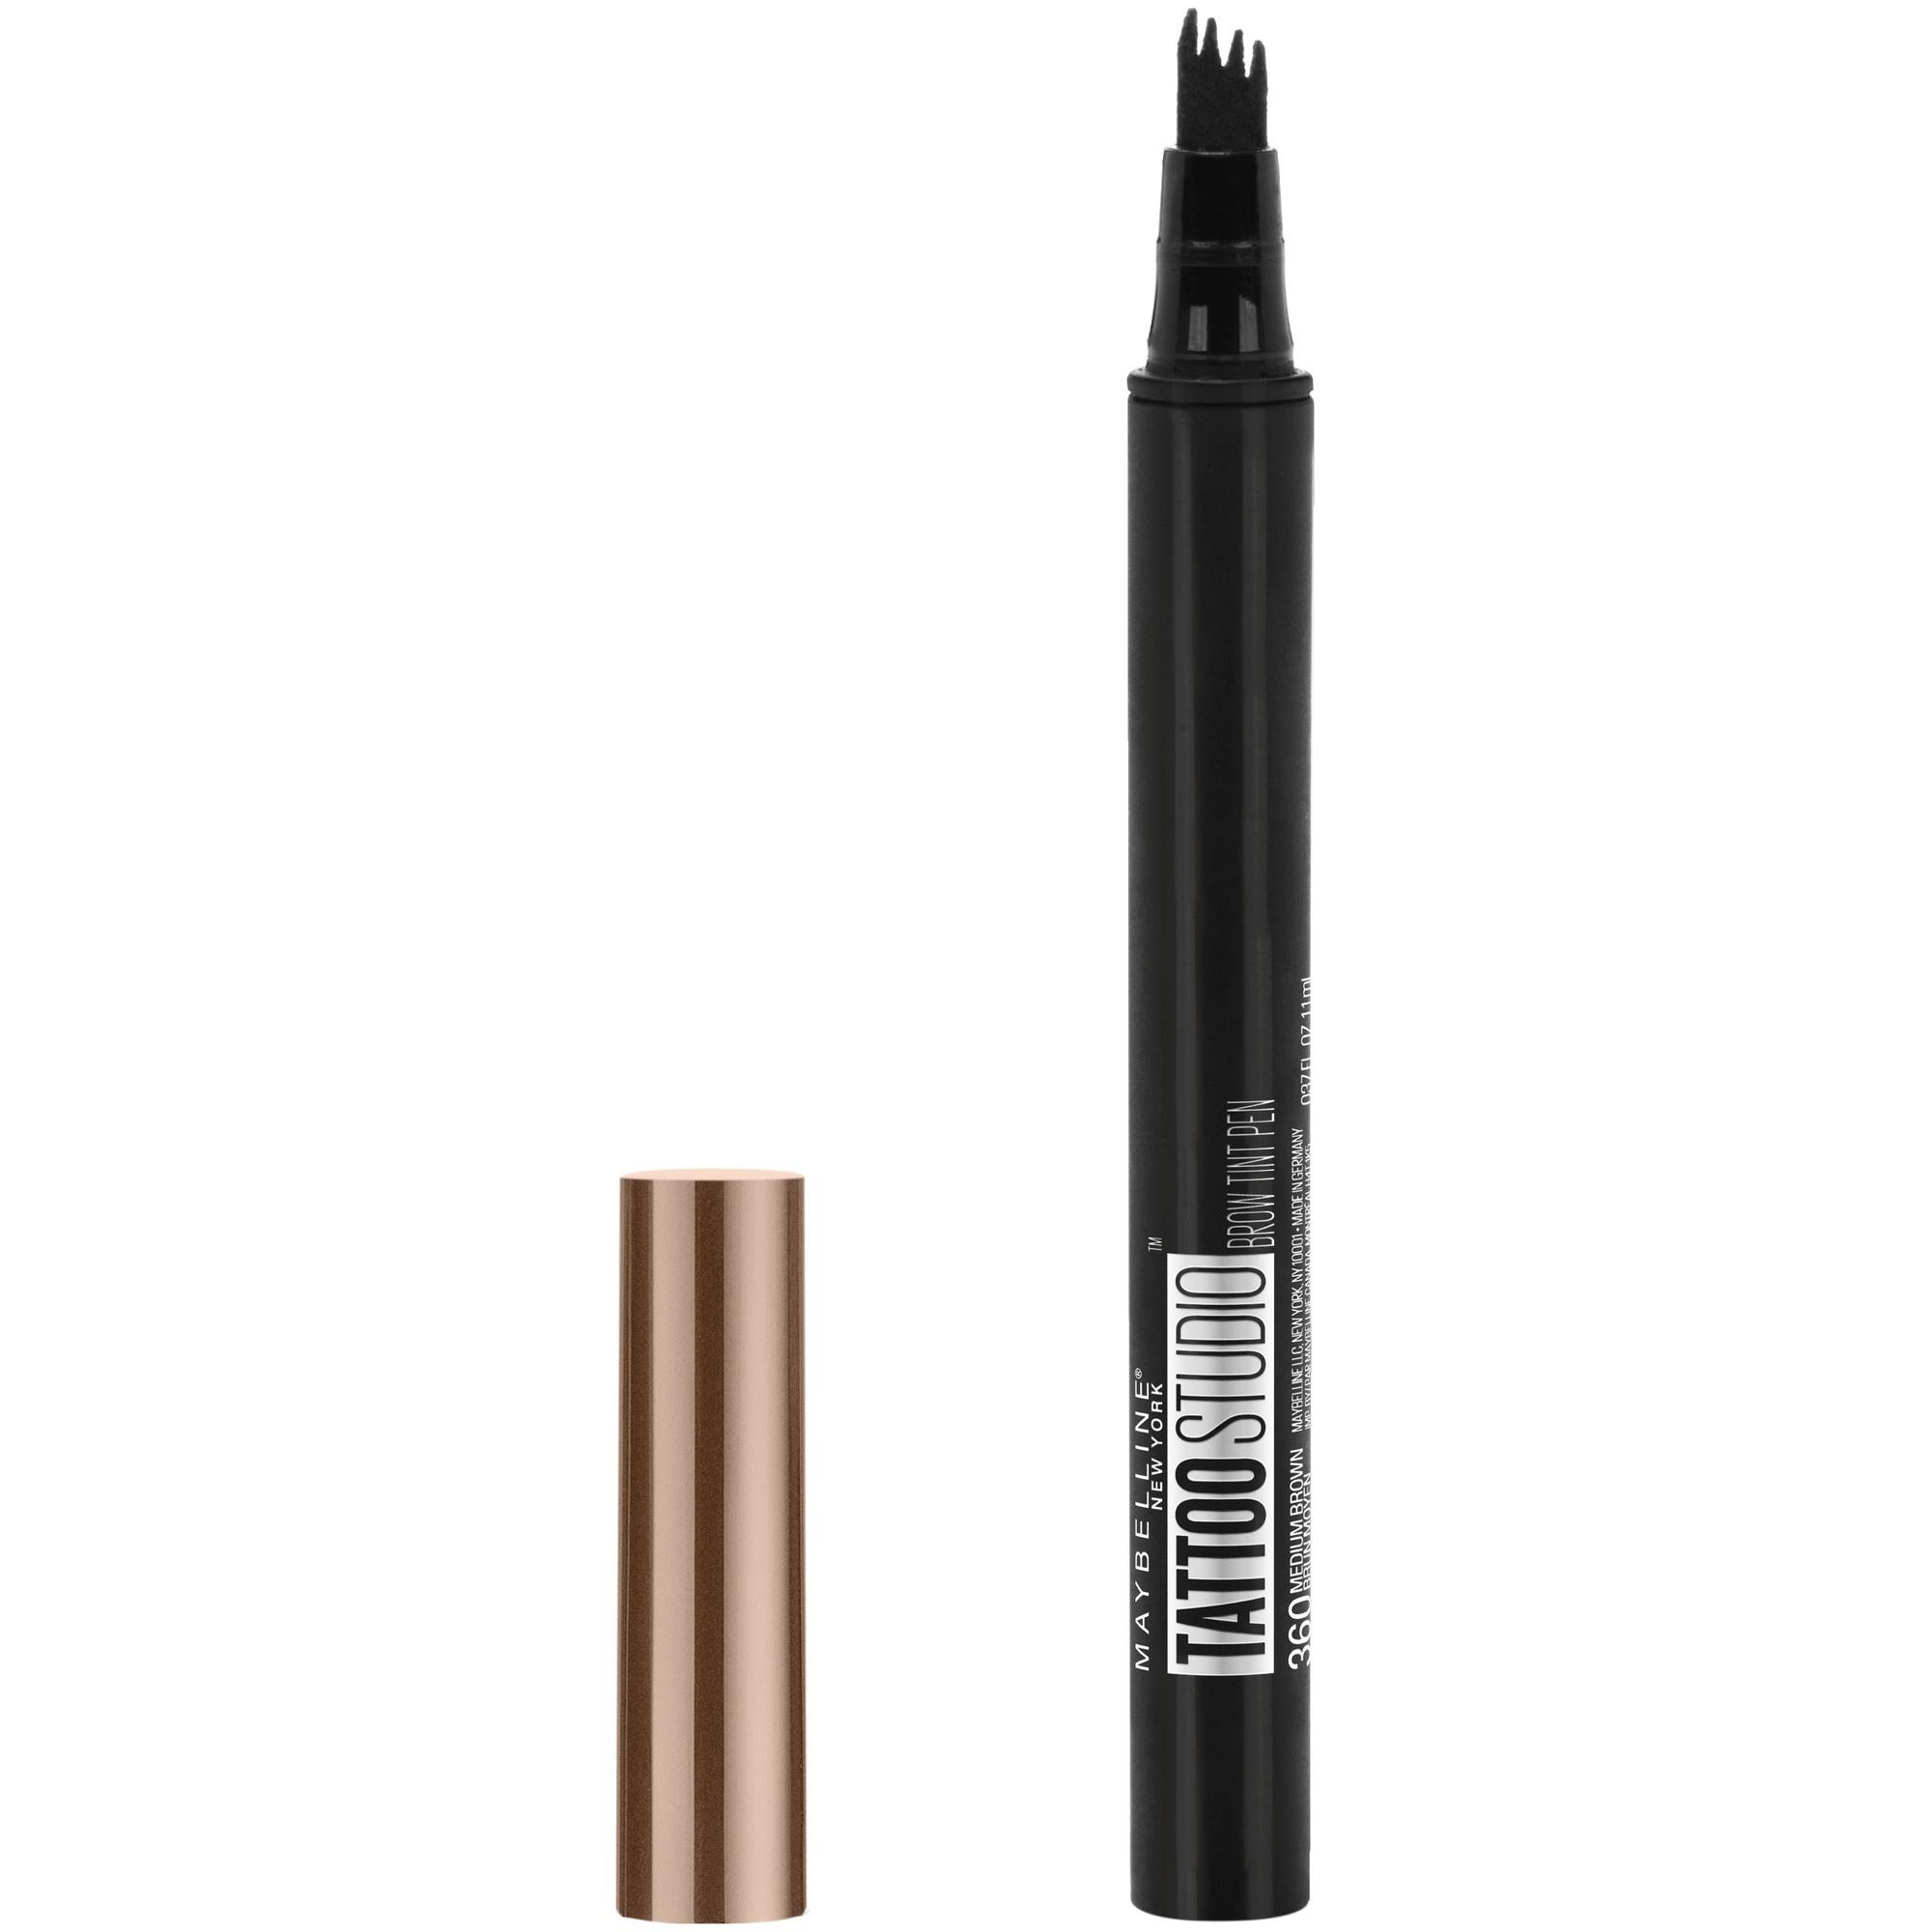 Maybelline Brow Tint Pen Makeup, Soft Brown